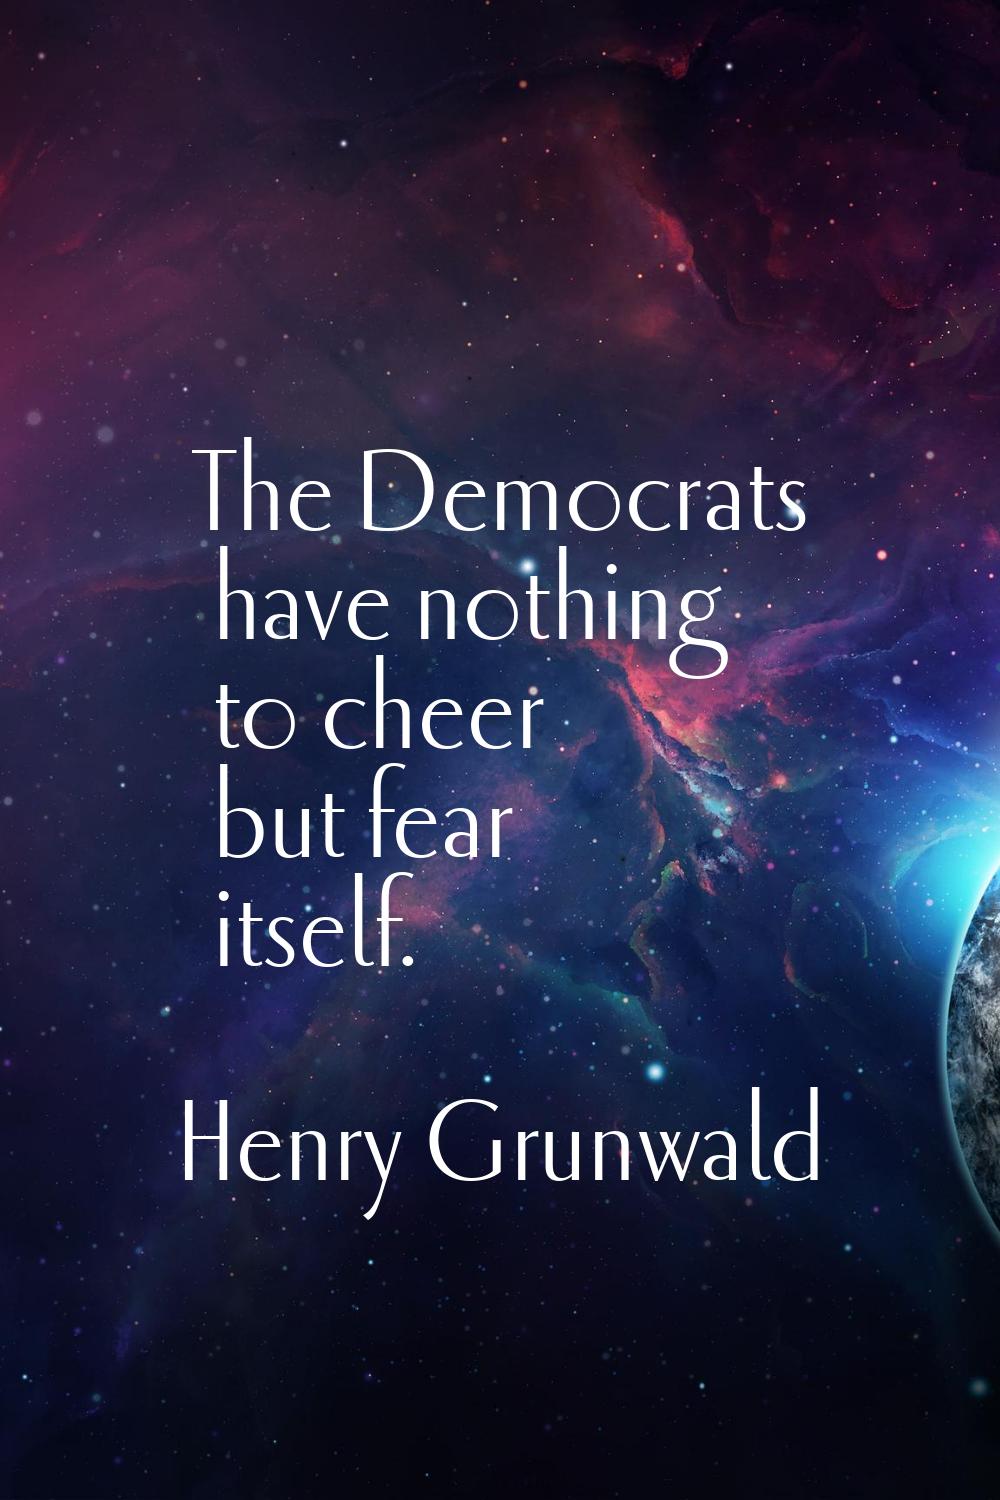 The Democrats have nothing to cheer but fear itself.